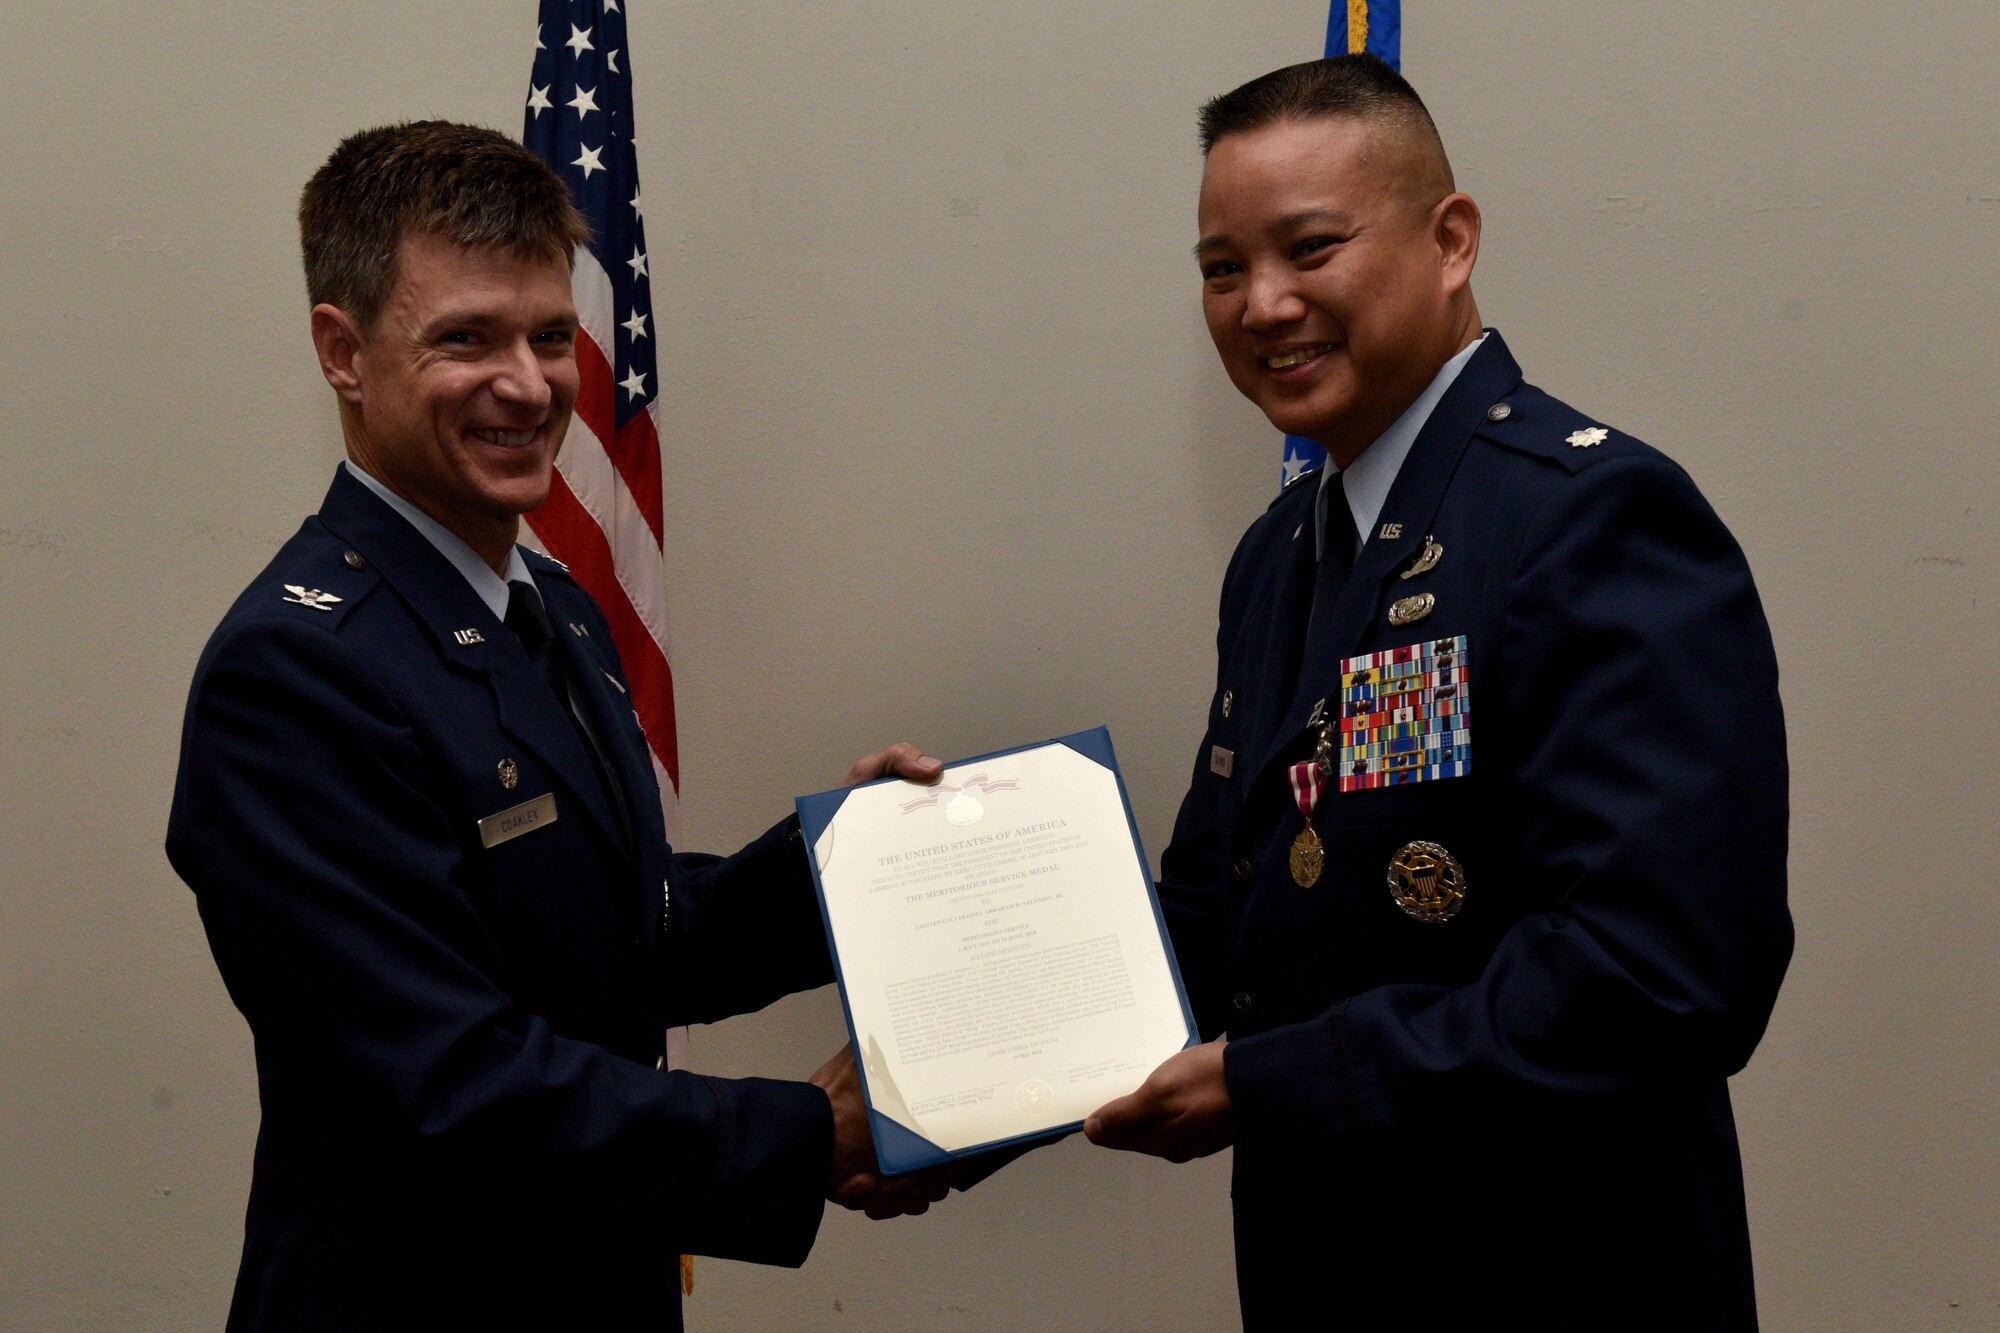 U.S. Air Force Col. Thomas Coakley, 17th Training Group commander, presents a meritorious service certificate to Lt. Col. Abraham Salomon, 17th Training Squadron outgoing commander, during the 17th TRSS Change of Command in the Event Center on Goodfellow Air Force Base, Texas, August 14, 2018. Salomon received the award for his outstanding service to the squadron. (U.S. Air Force photo by Senior Airman Randall Moose/Released)